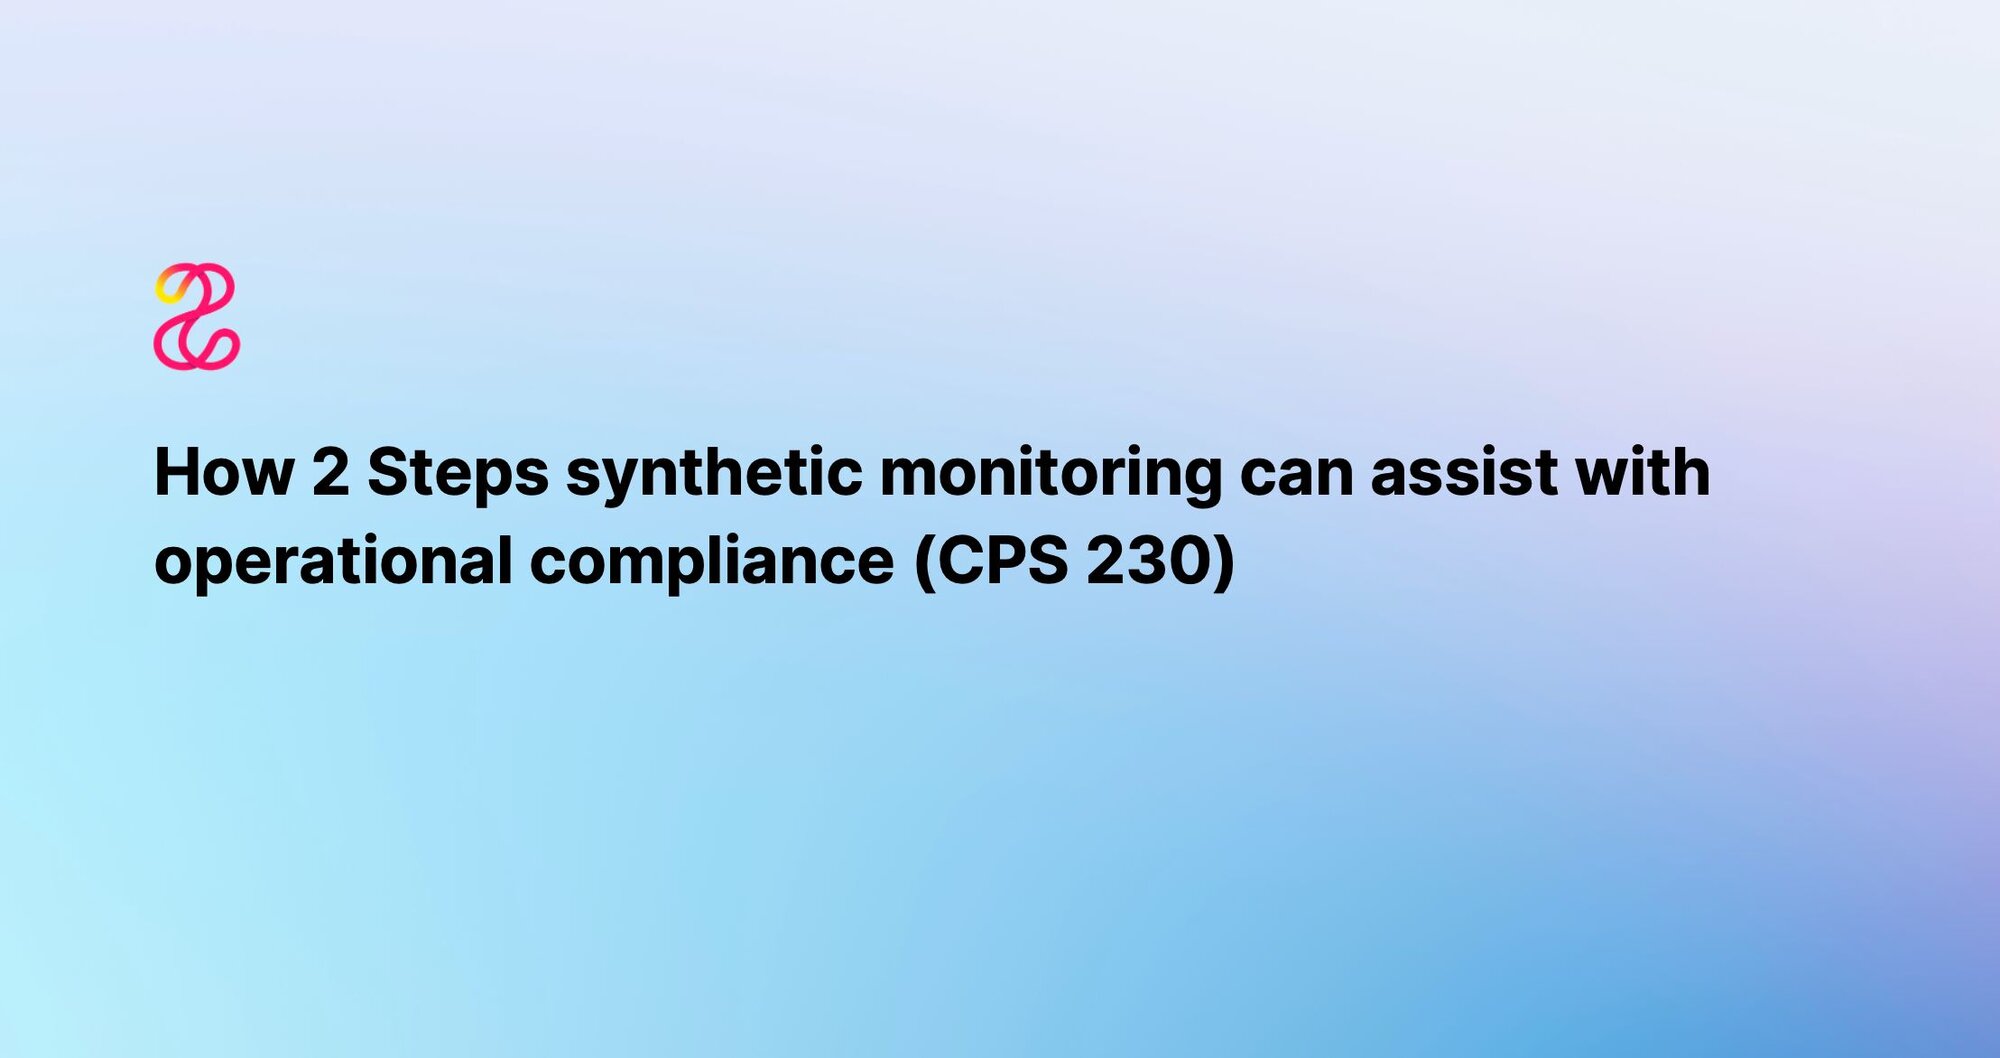 How 2 Steps synthetic monitoring can assist with operational compliance (CPS 230)